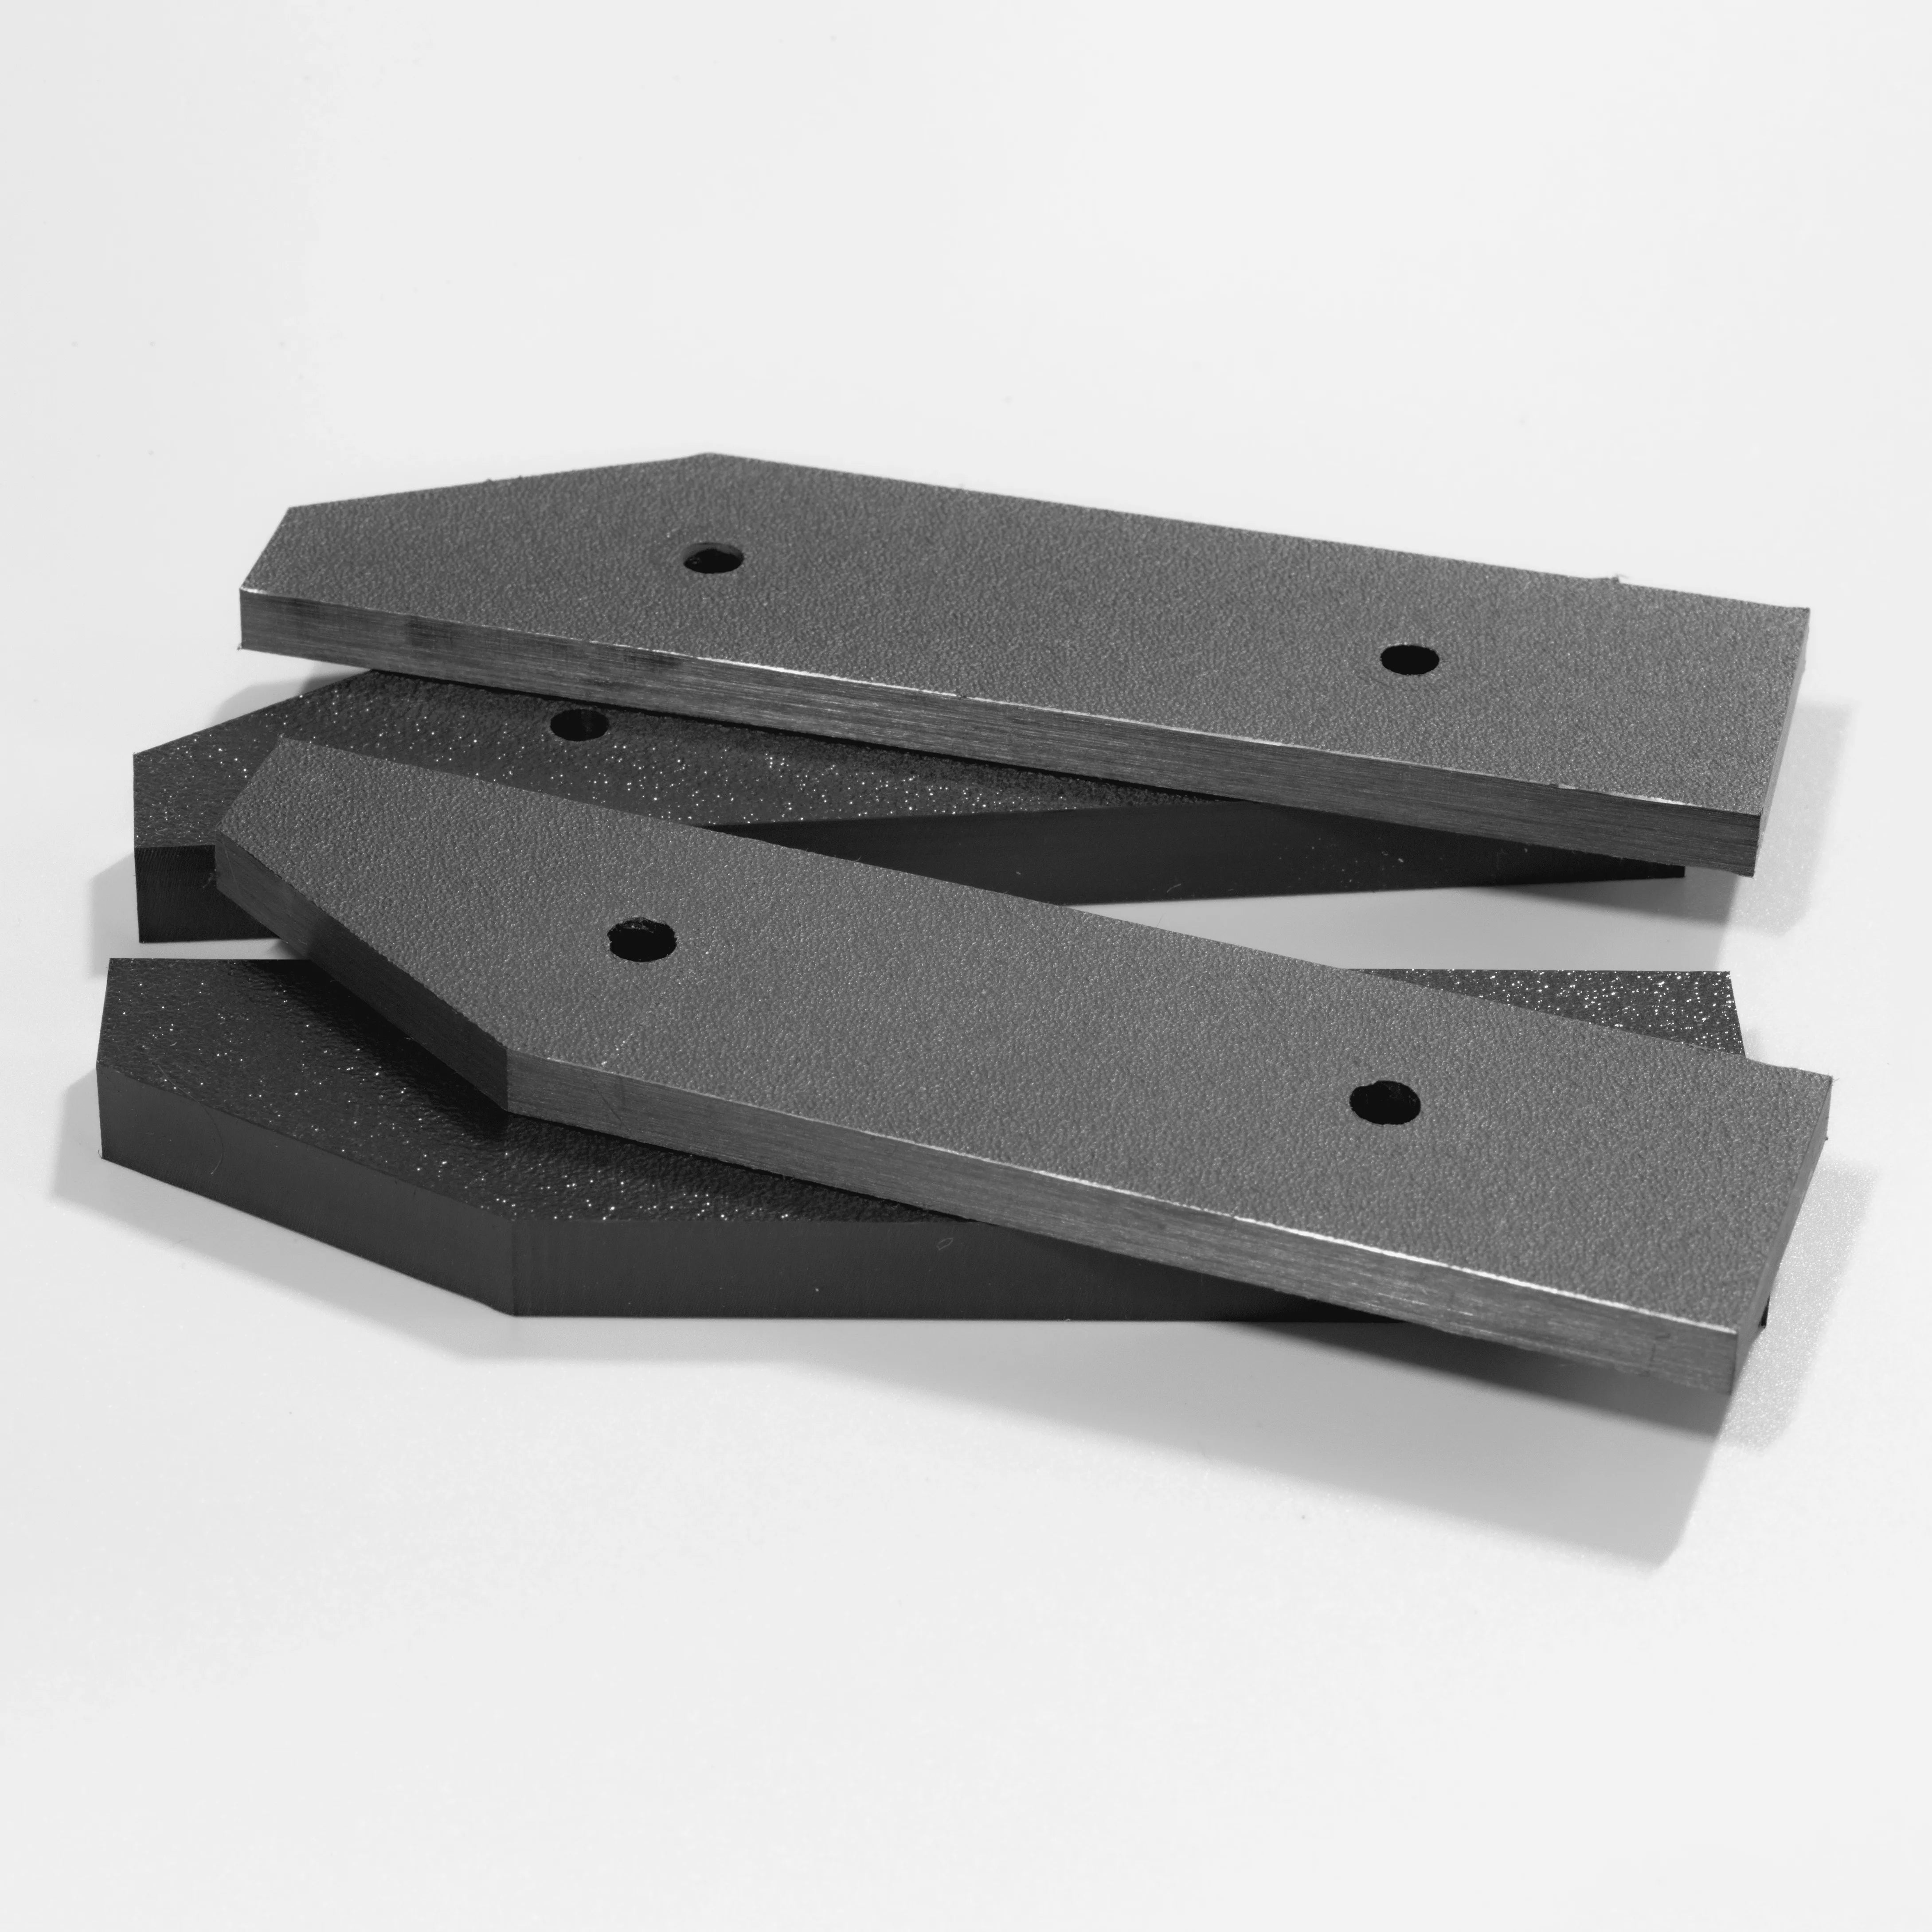 Fannie standoffs - 0.25" and 0.375" HDPE pairs